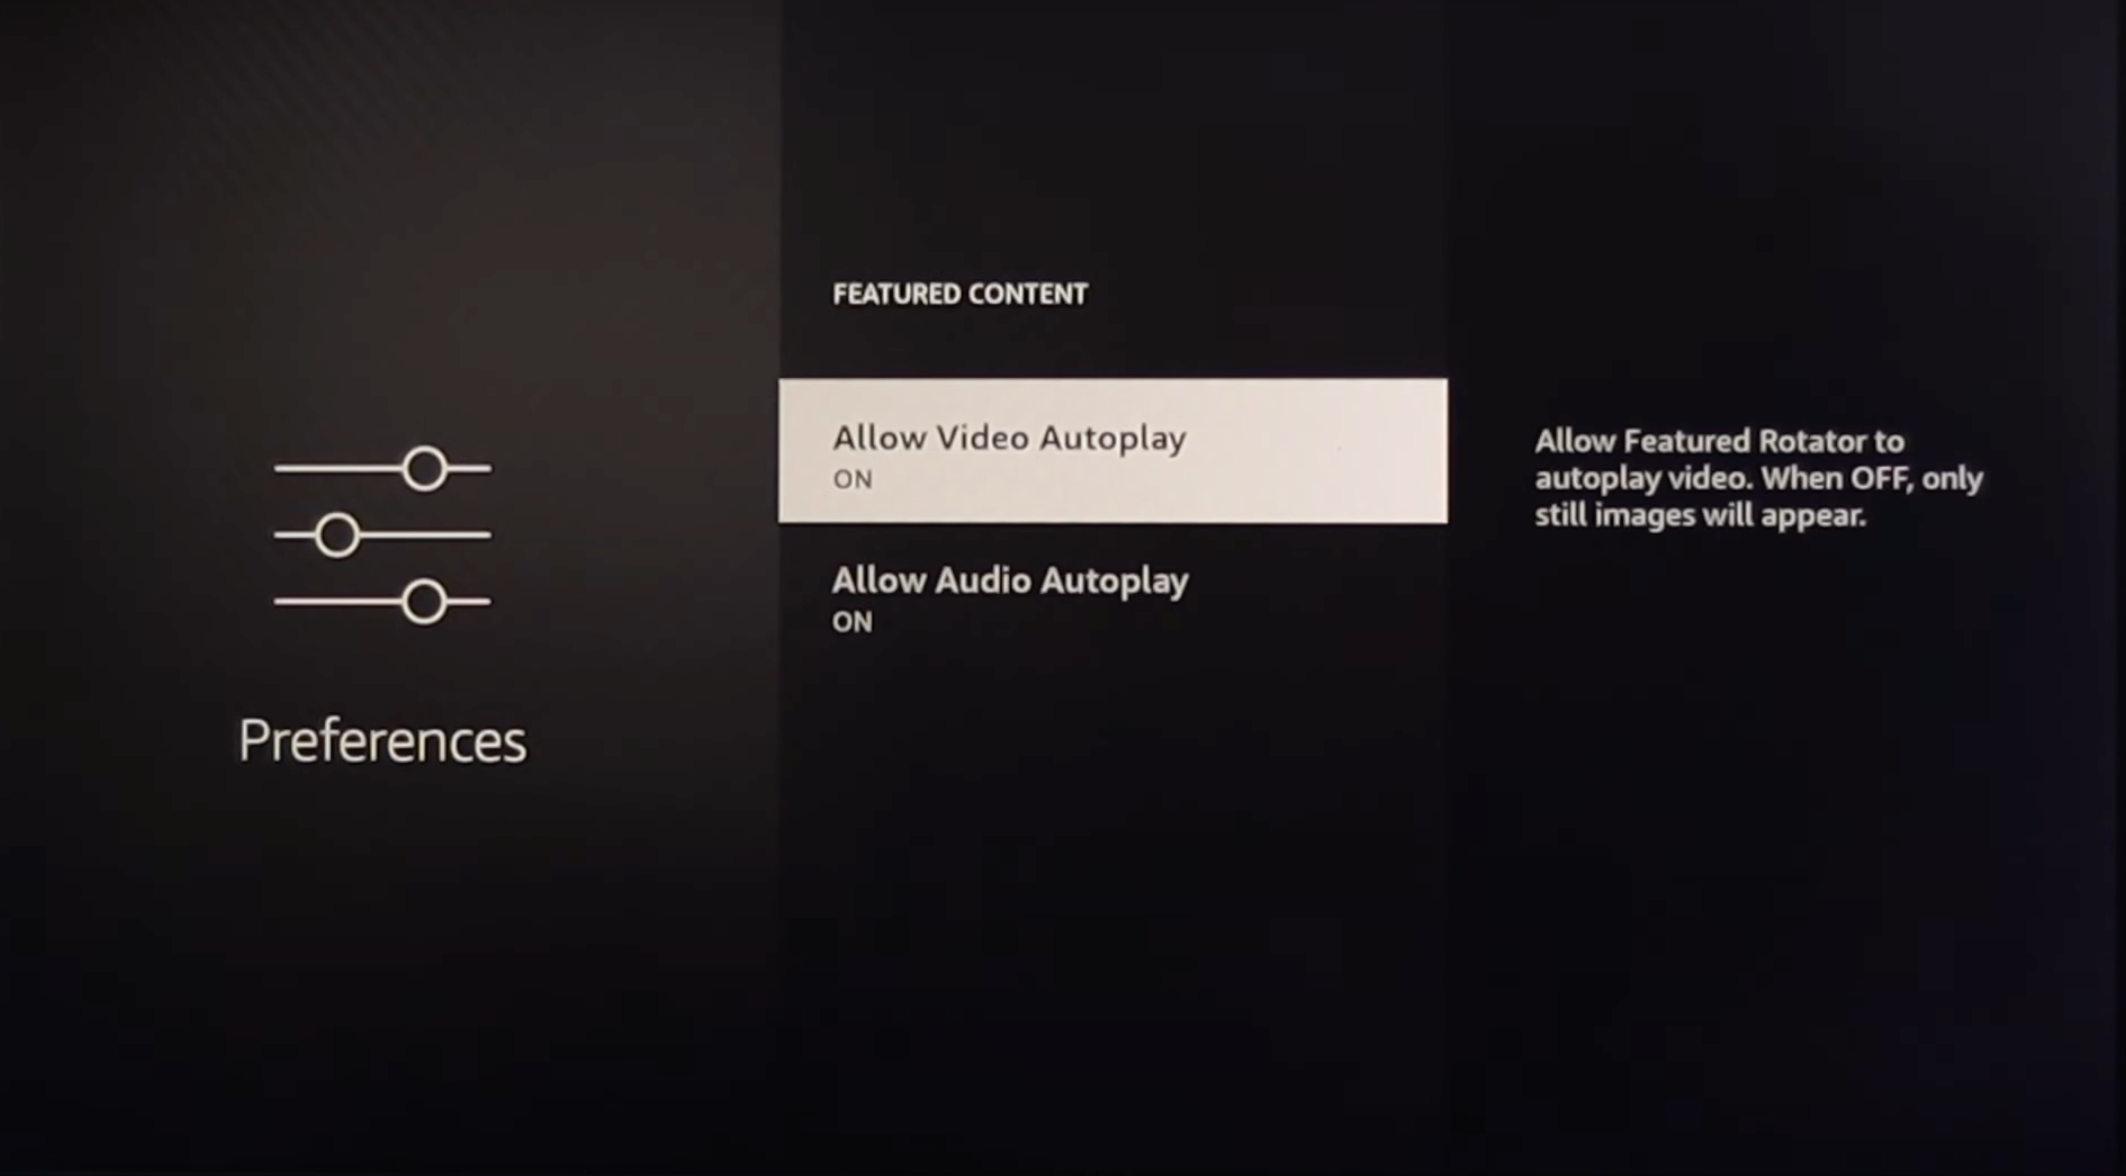 Disable autoplay ads on the Fire TV stick